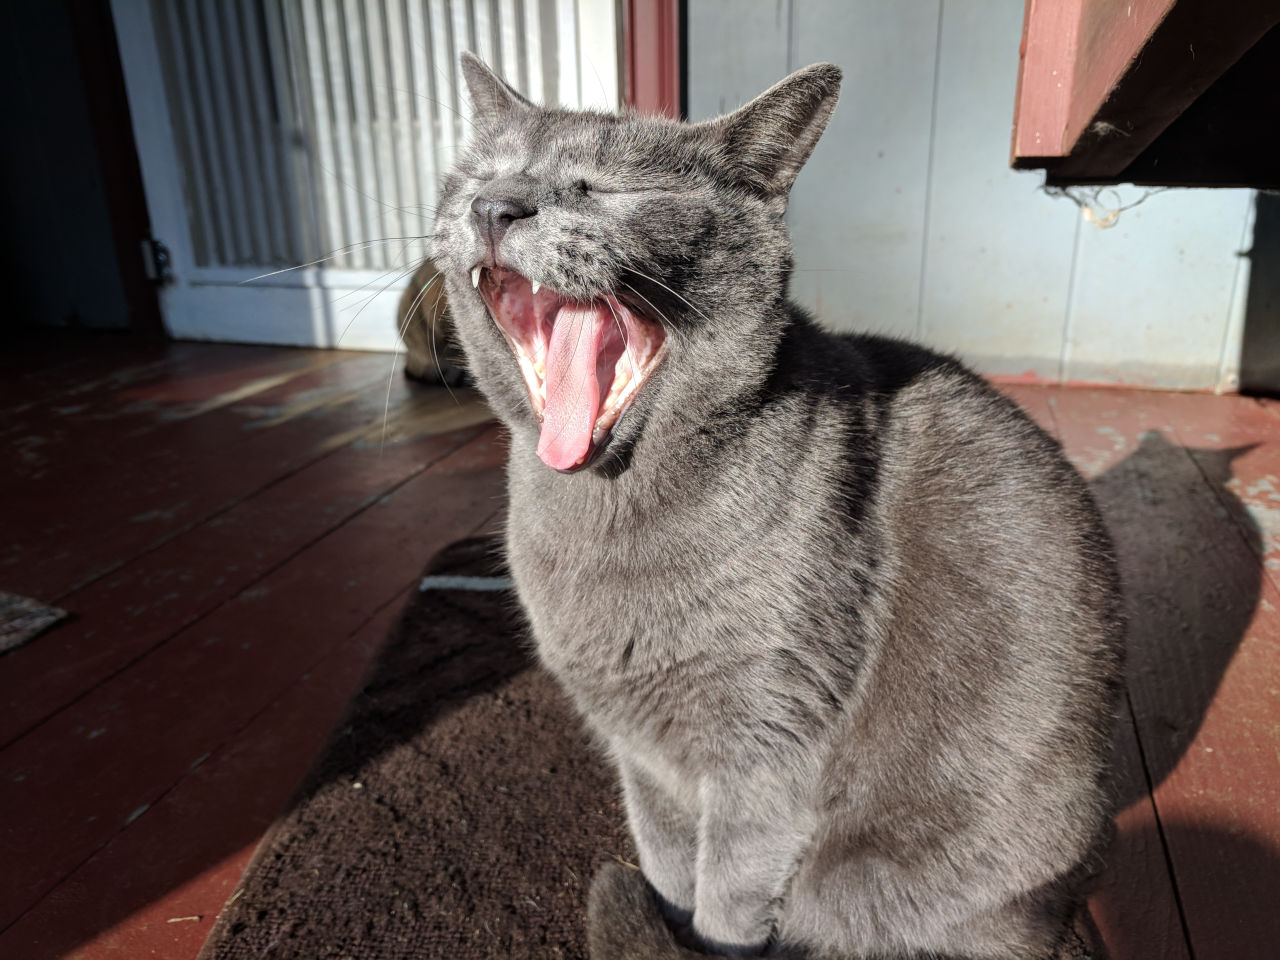 Jane, a solid gray cat, sitting and yawning on a porch.